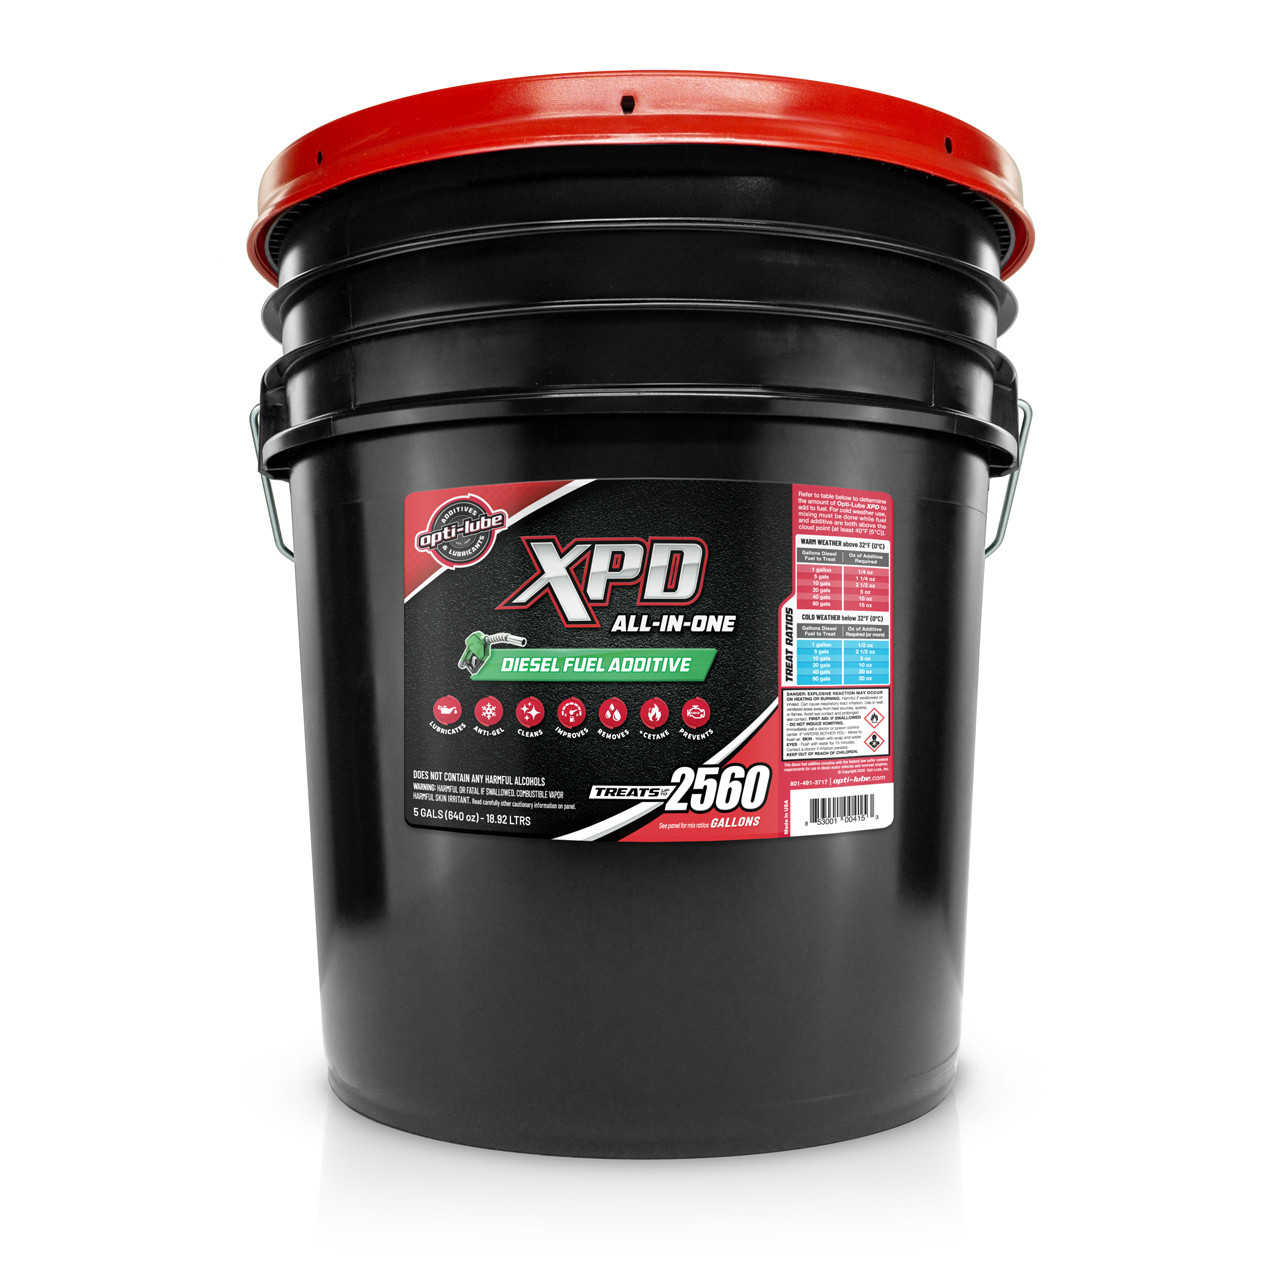 OPTI-LUBE XPD ALL-IN-ONE DIESEL FUEL ADDITIVE: 5 GALLON PAIL WITH HEAVY  DUTY ACCESSORIES (1 HD HAND PUMP AND 4 EMPTY 8 OUNCE BOTTLES), OPT-XPD5HD,  B01KGLY59O